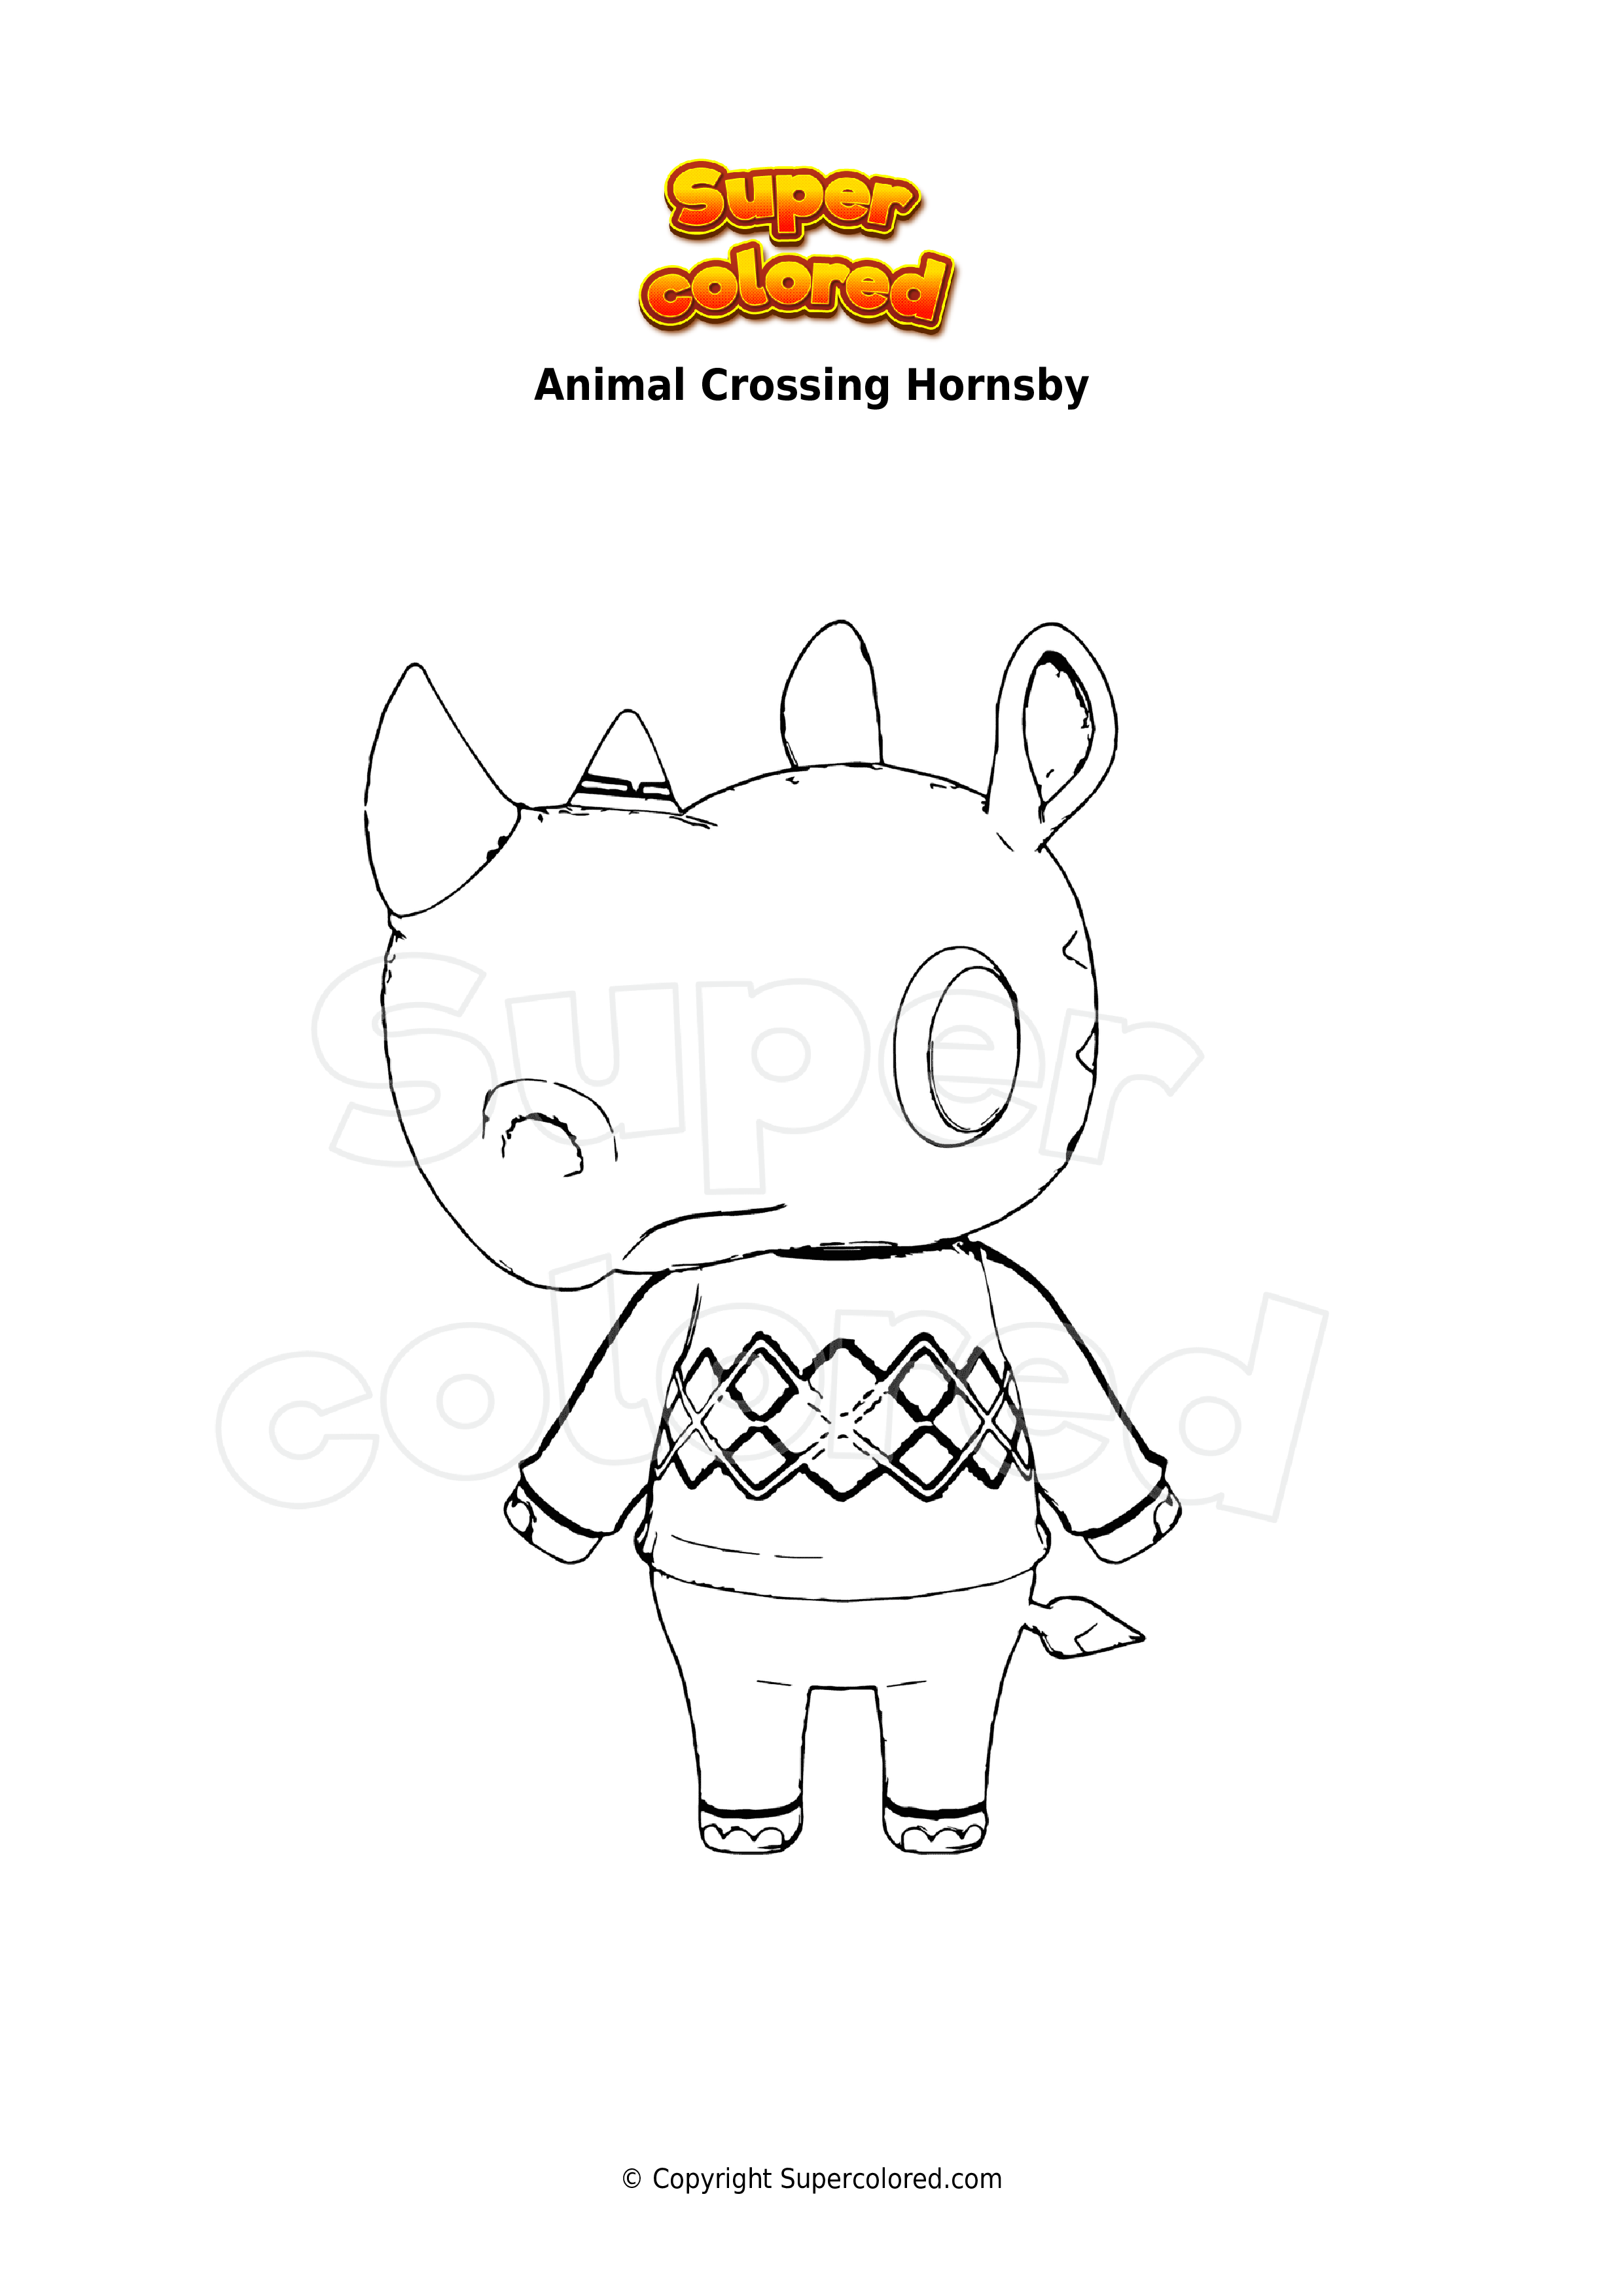 Coloring page Animal Crossing Hornsby 